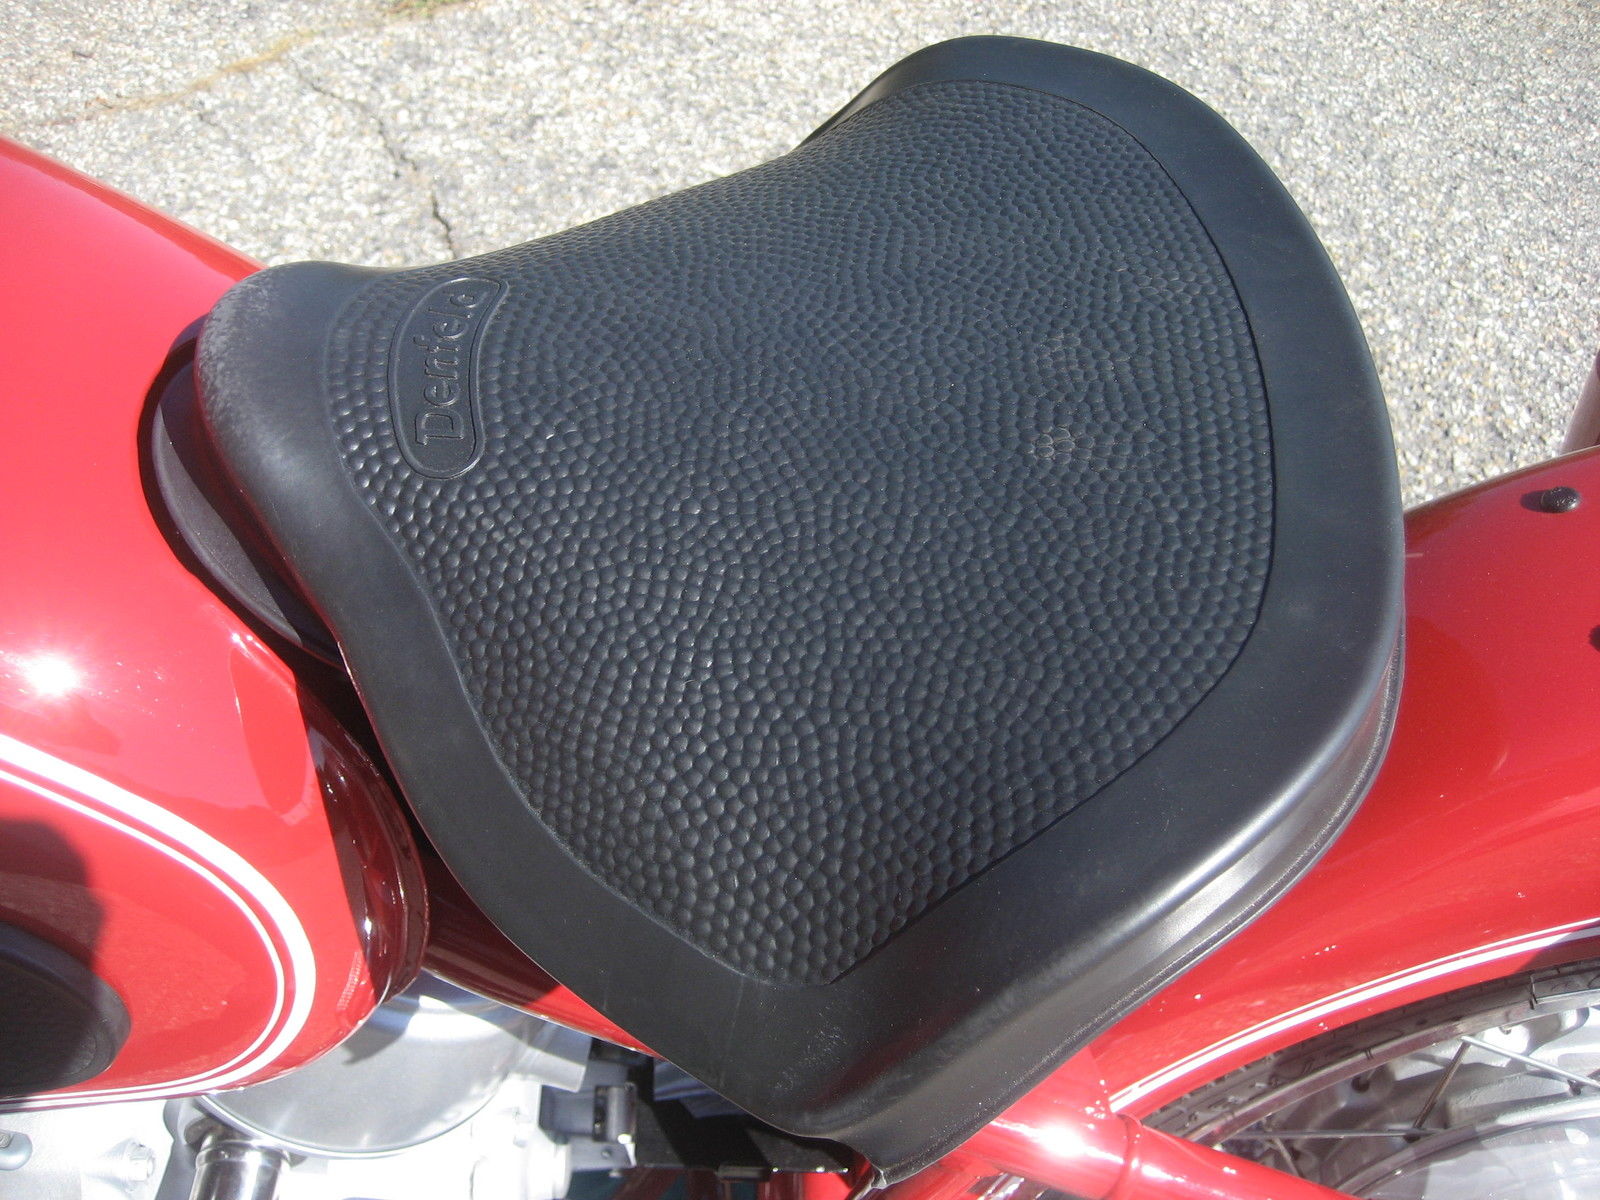 BMW R60 - 1969 - Replacement Seat.